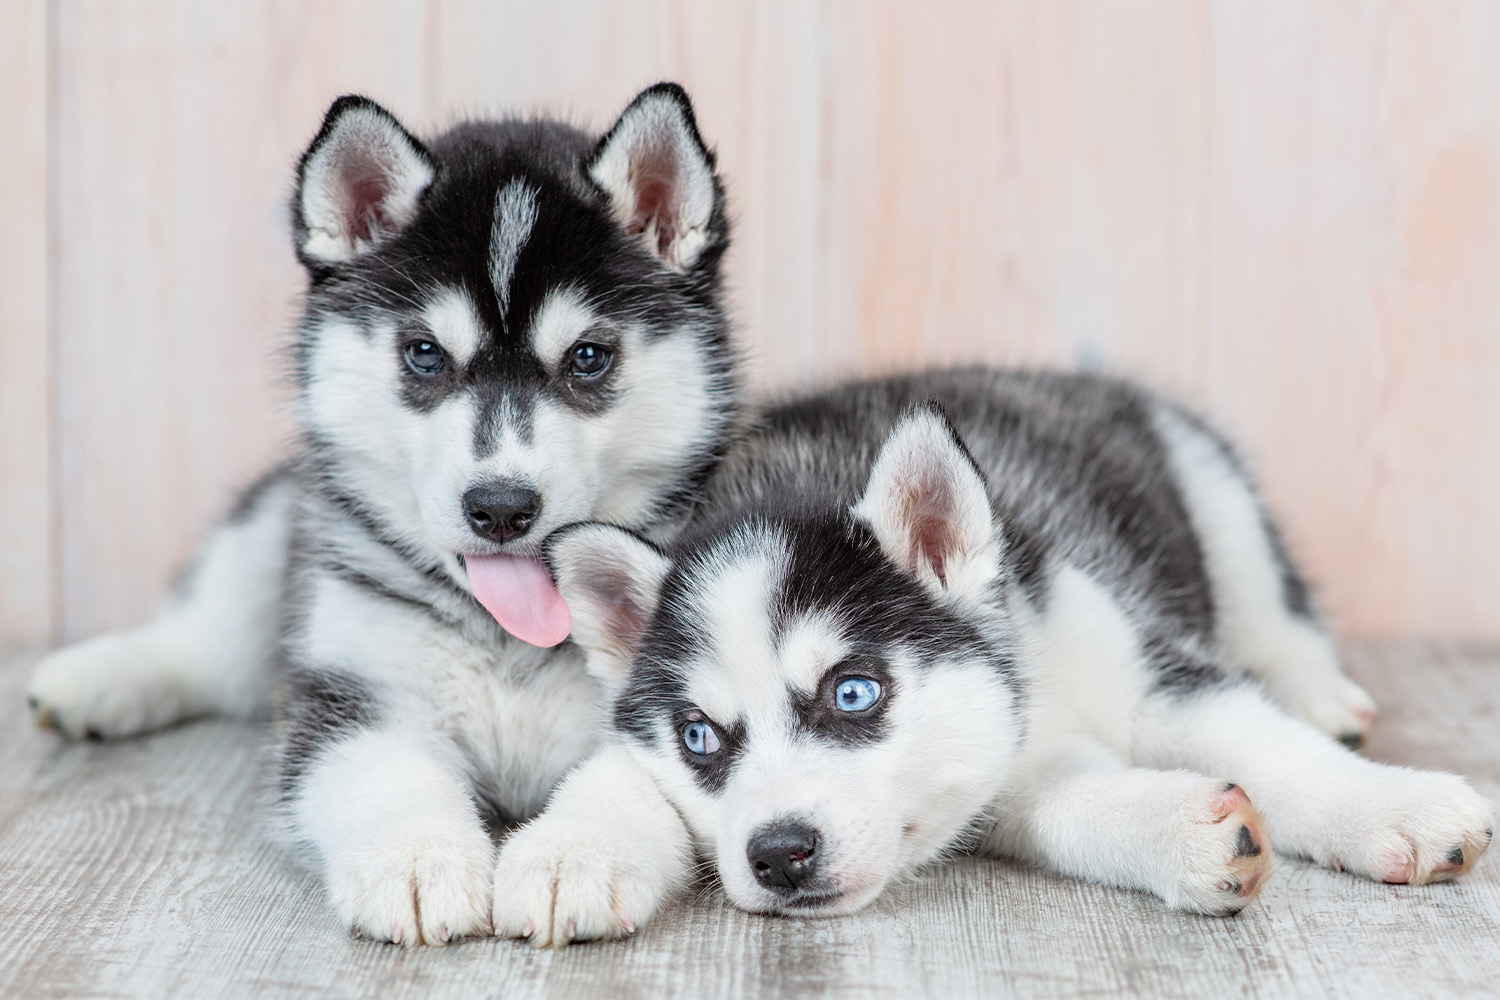 How To Train Your Husky Puppy Like a Pro